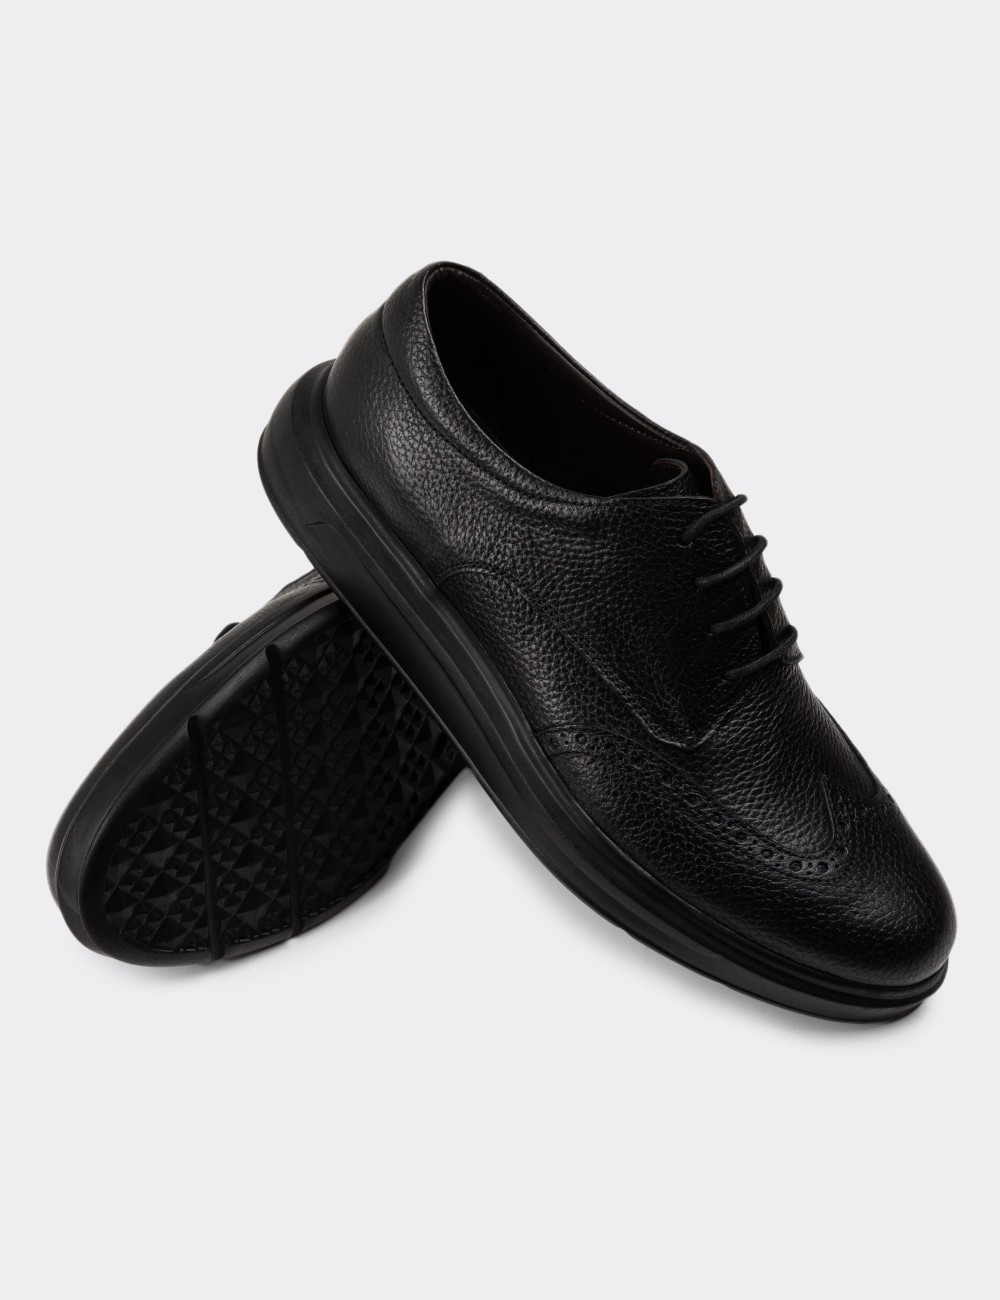 Black Leather Lace-up Shoes - 01942MSYHP01